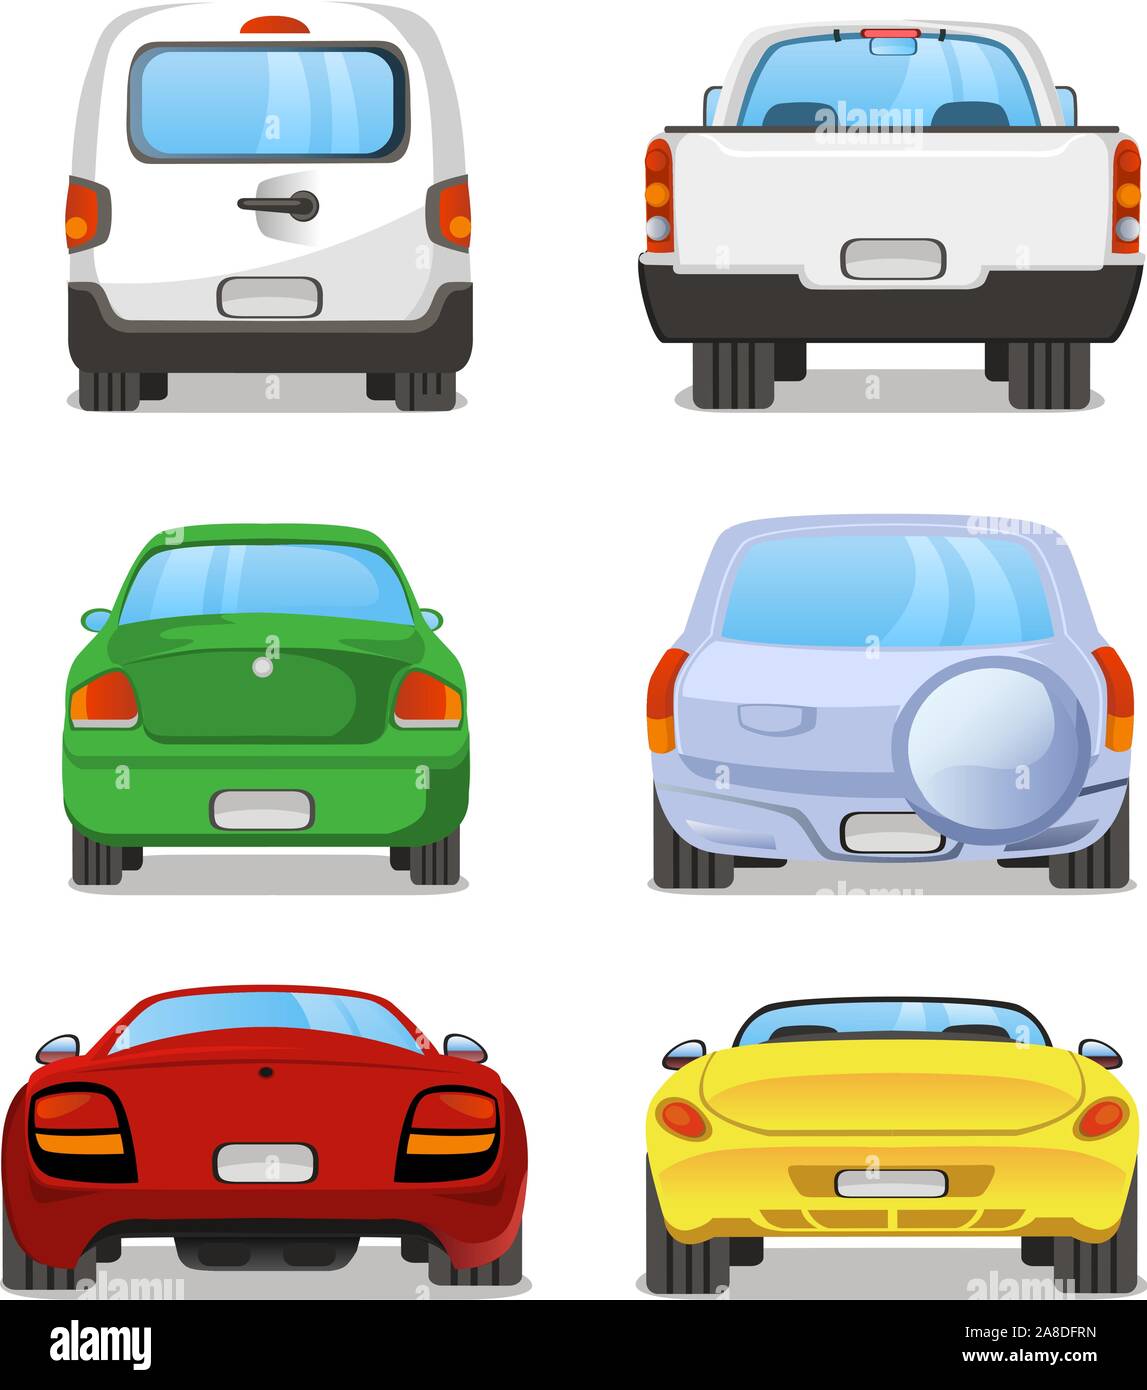 Vector cartoon Car rear set 2. With back view of six different types of car. Pick up truck, truck, mini van, station wagon, sports car, hatchback. Stock Vector